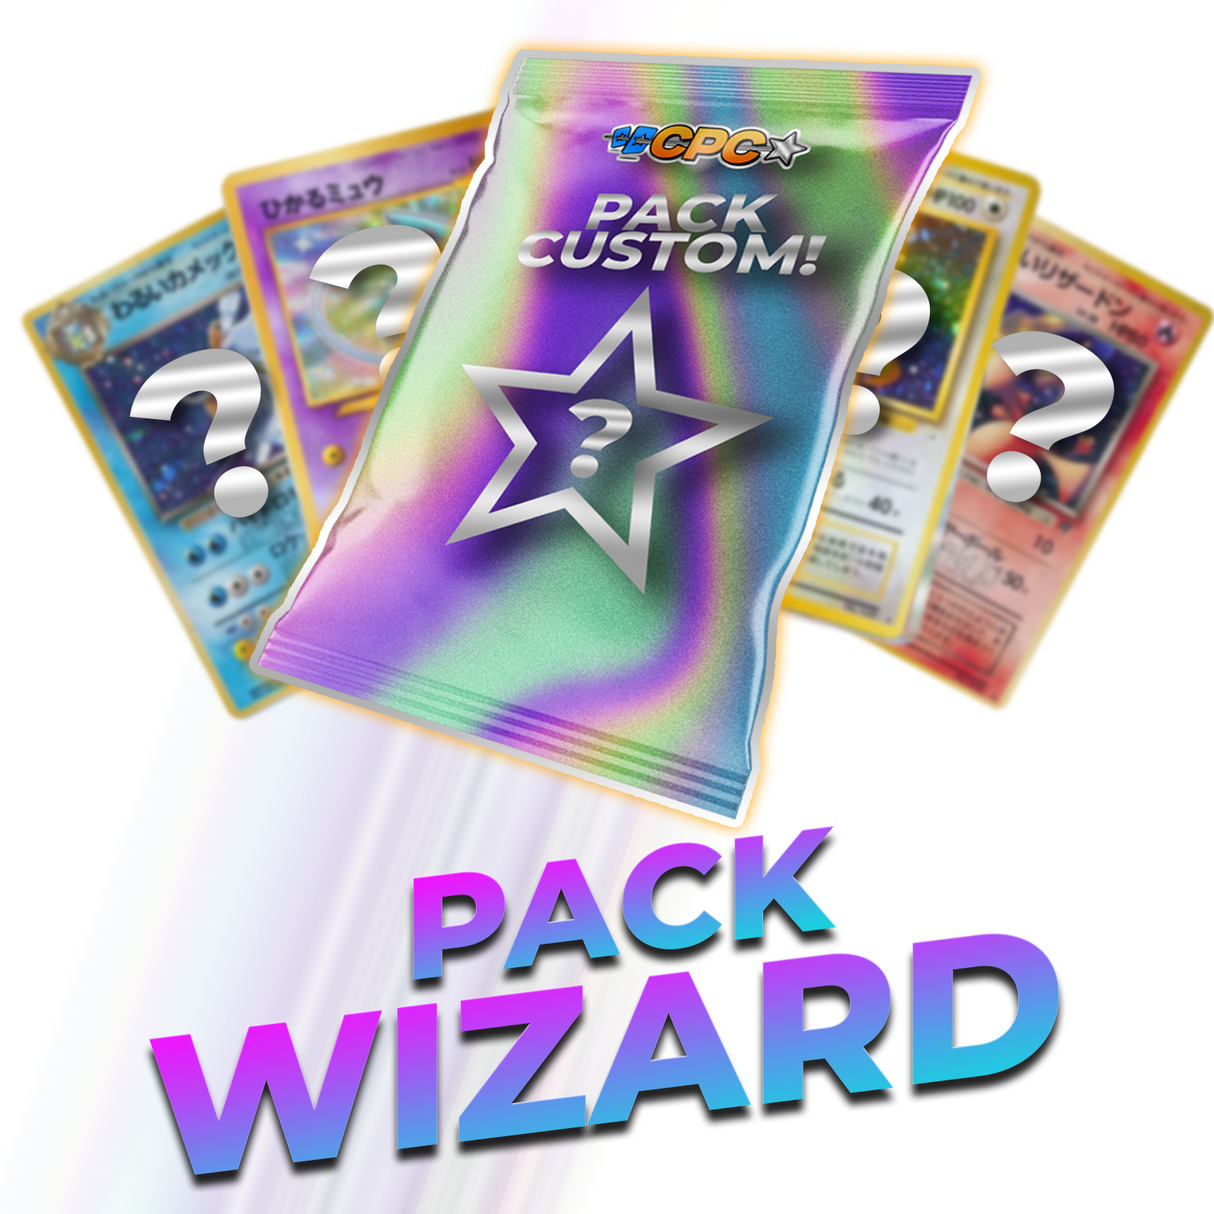 Booster Pack Wizard C.P.C